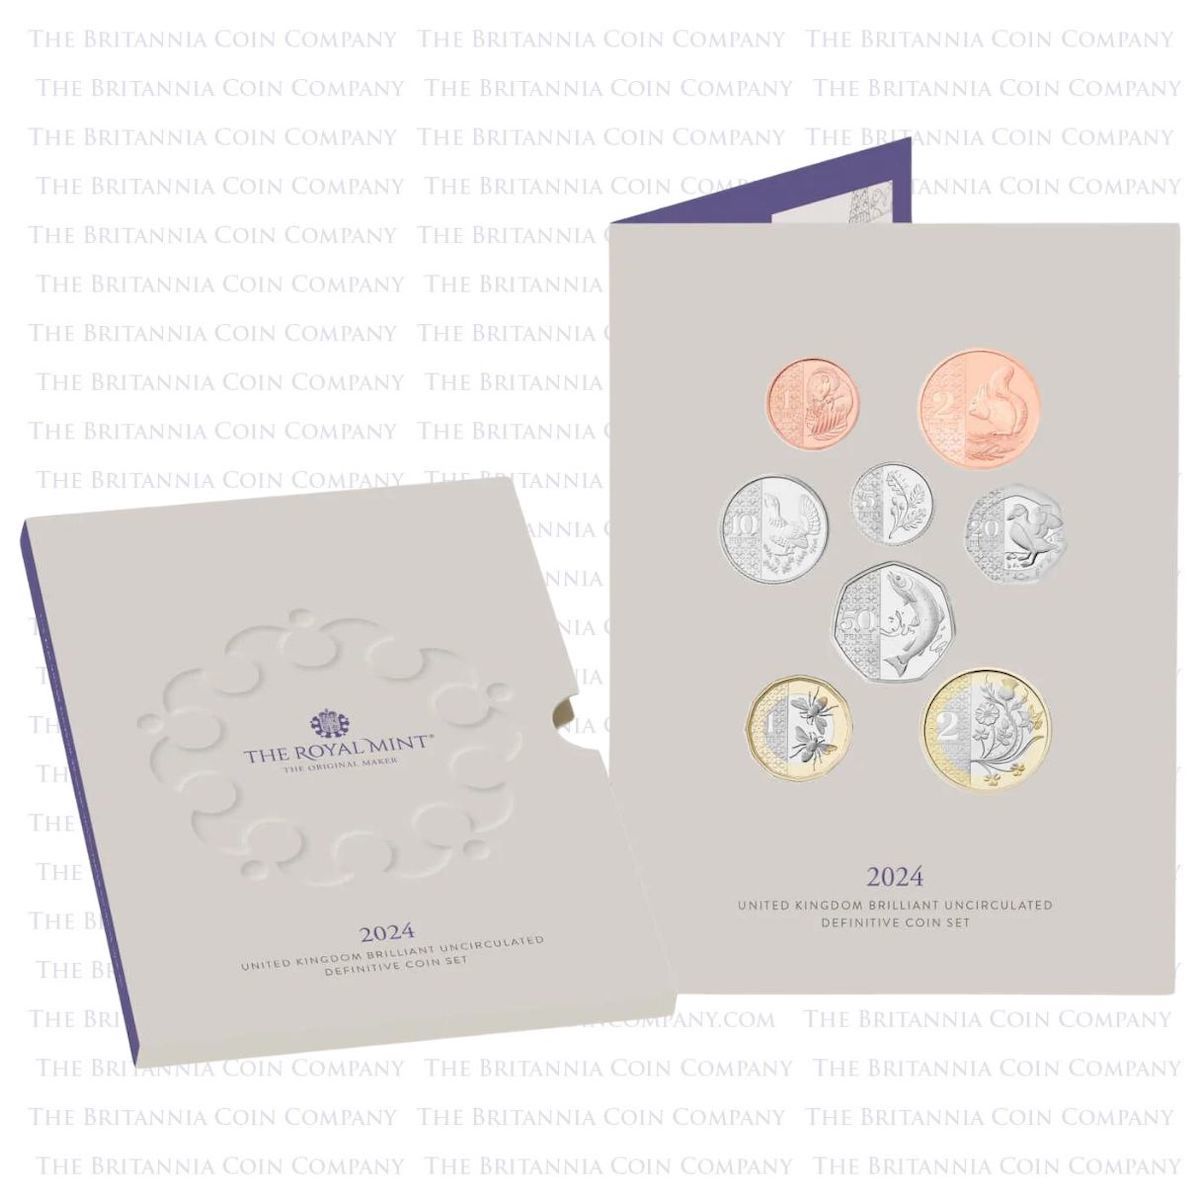 DUW24 2024 UK Brilliant Uncirculated Definitive Eight Coin Annual Set In Folder